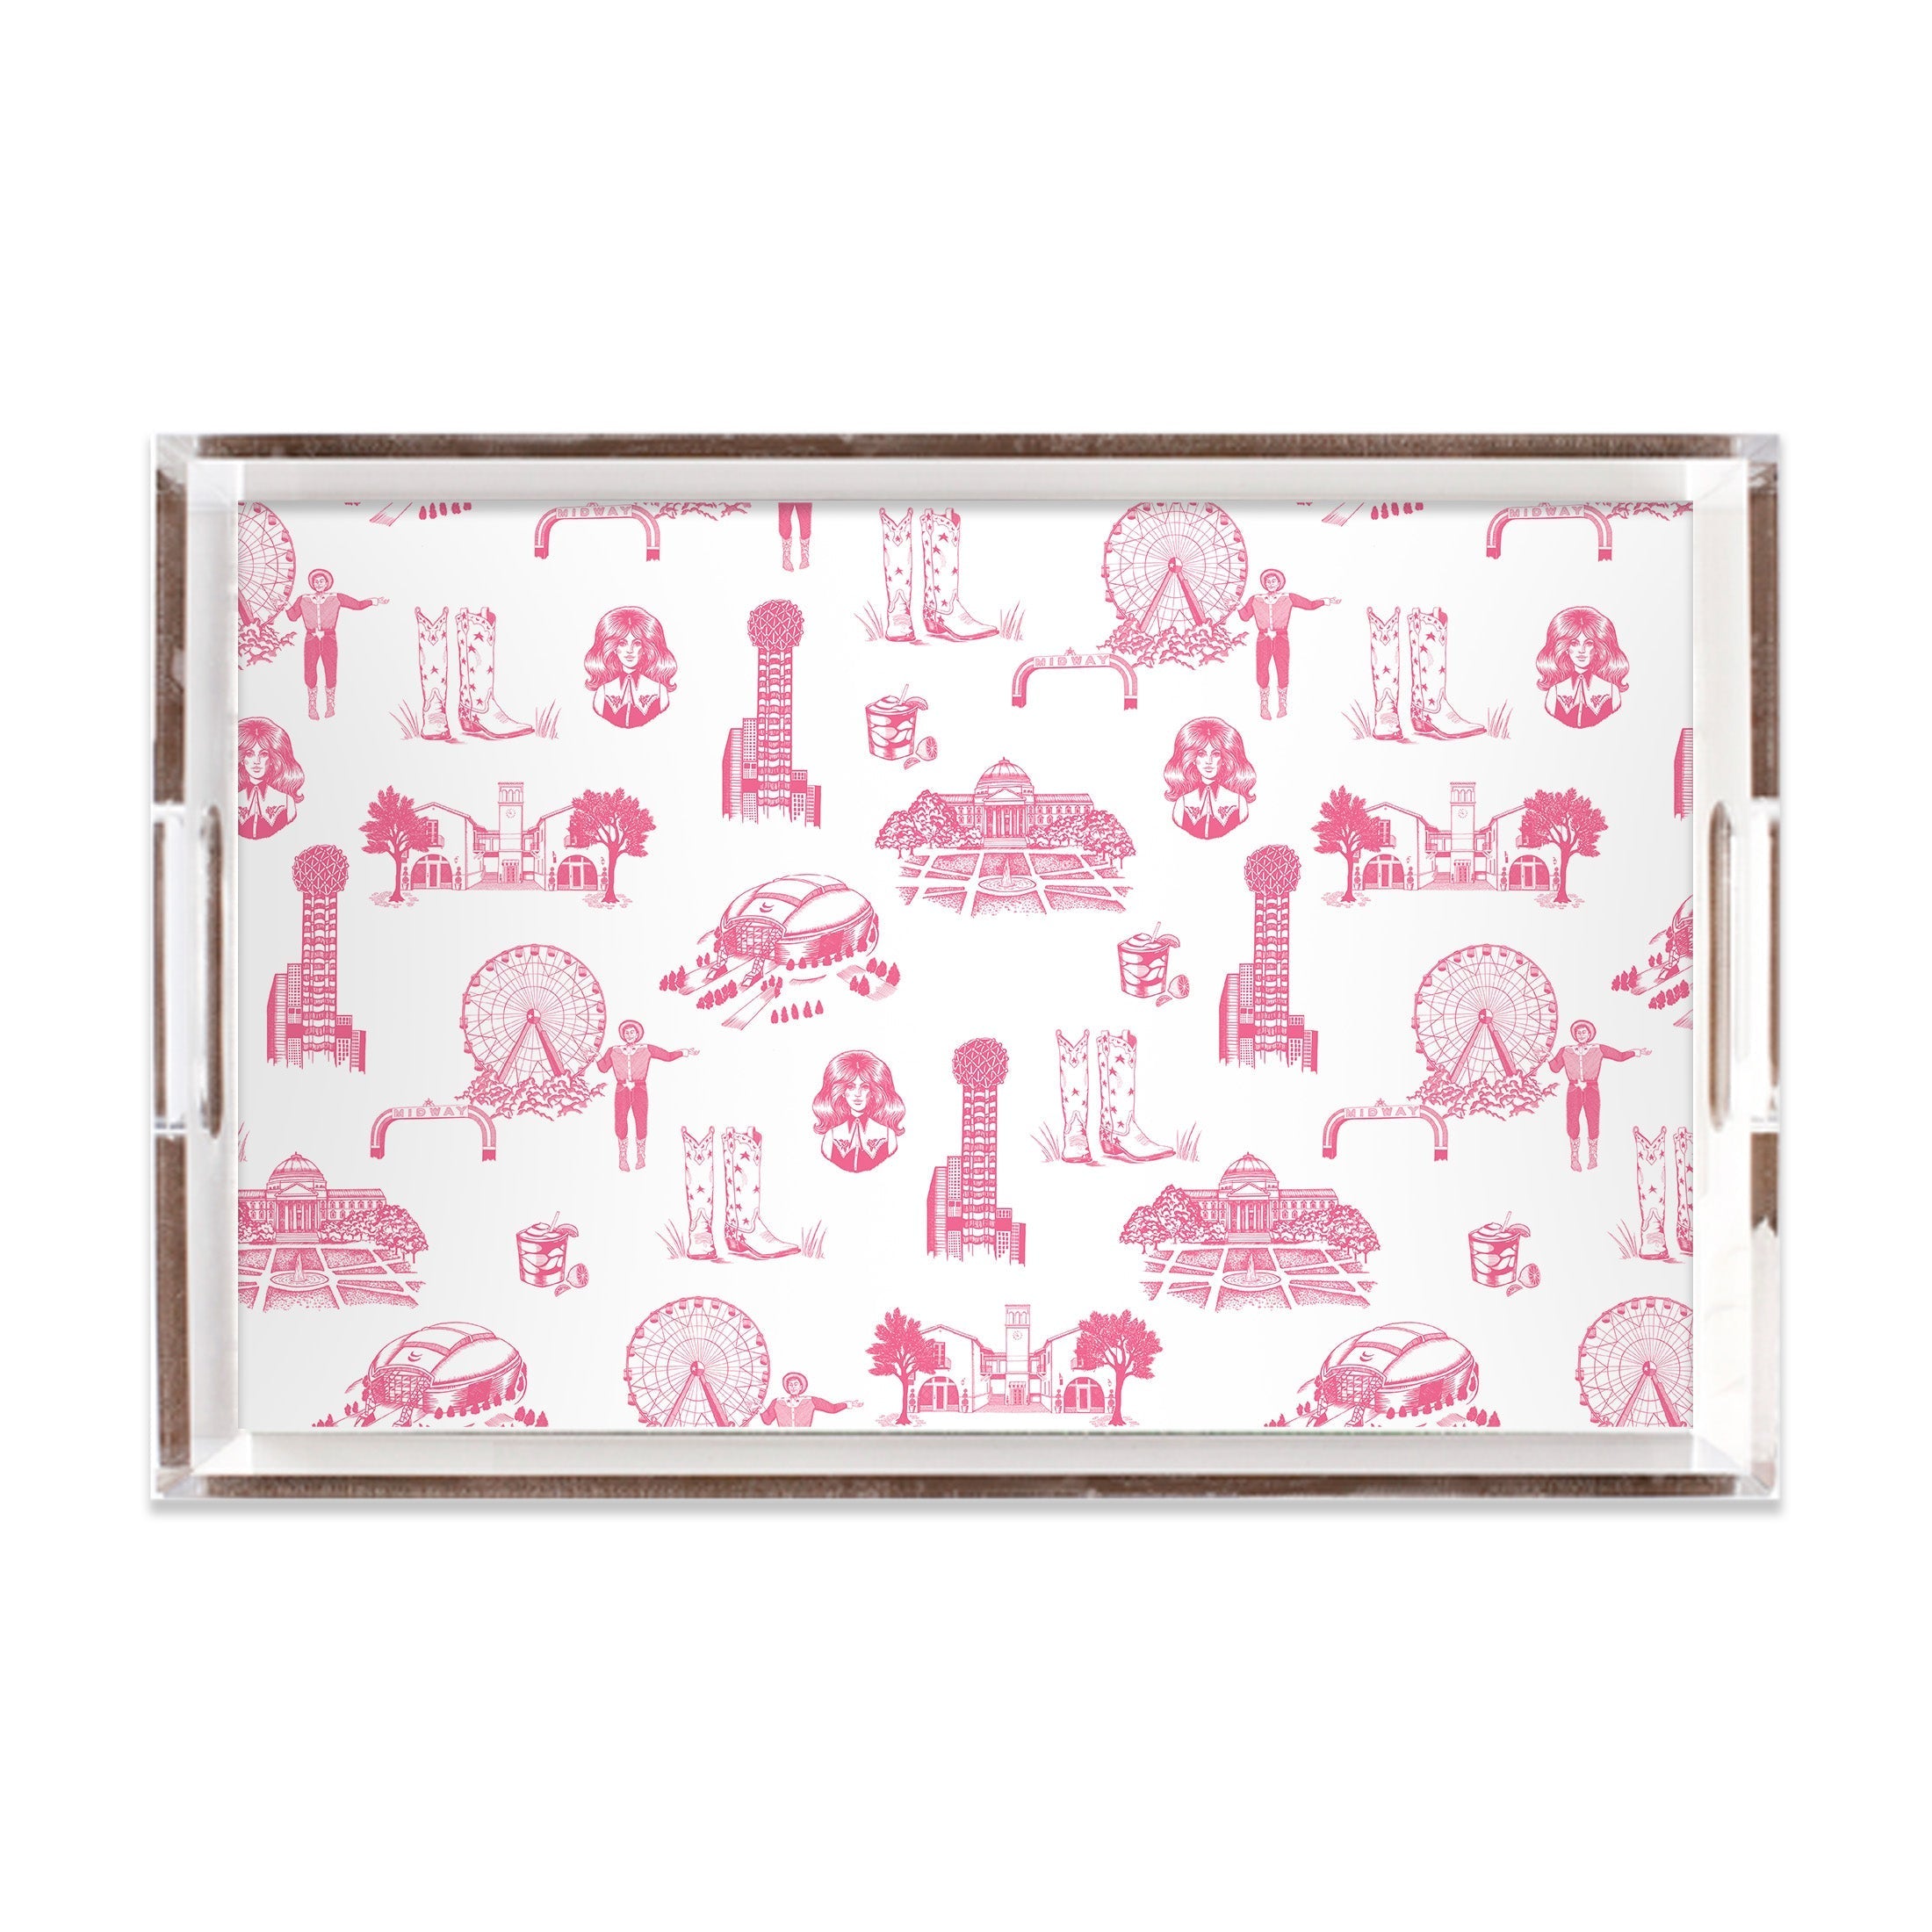 https://cdn.shopify.com/s/files/1/0665/3515/products/dallas-toile-lucite-tray-lucite-trays-pink-11x17-katie-kime-31641804111969.jpg?v=1693332007